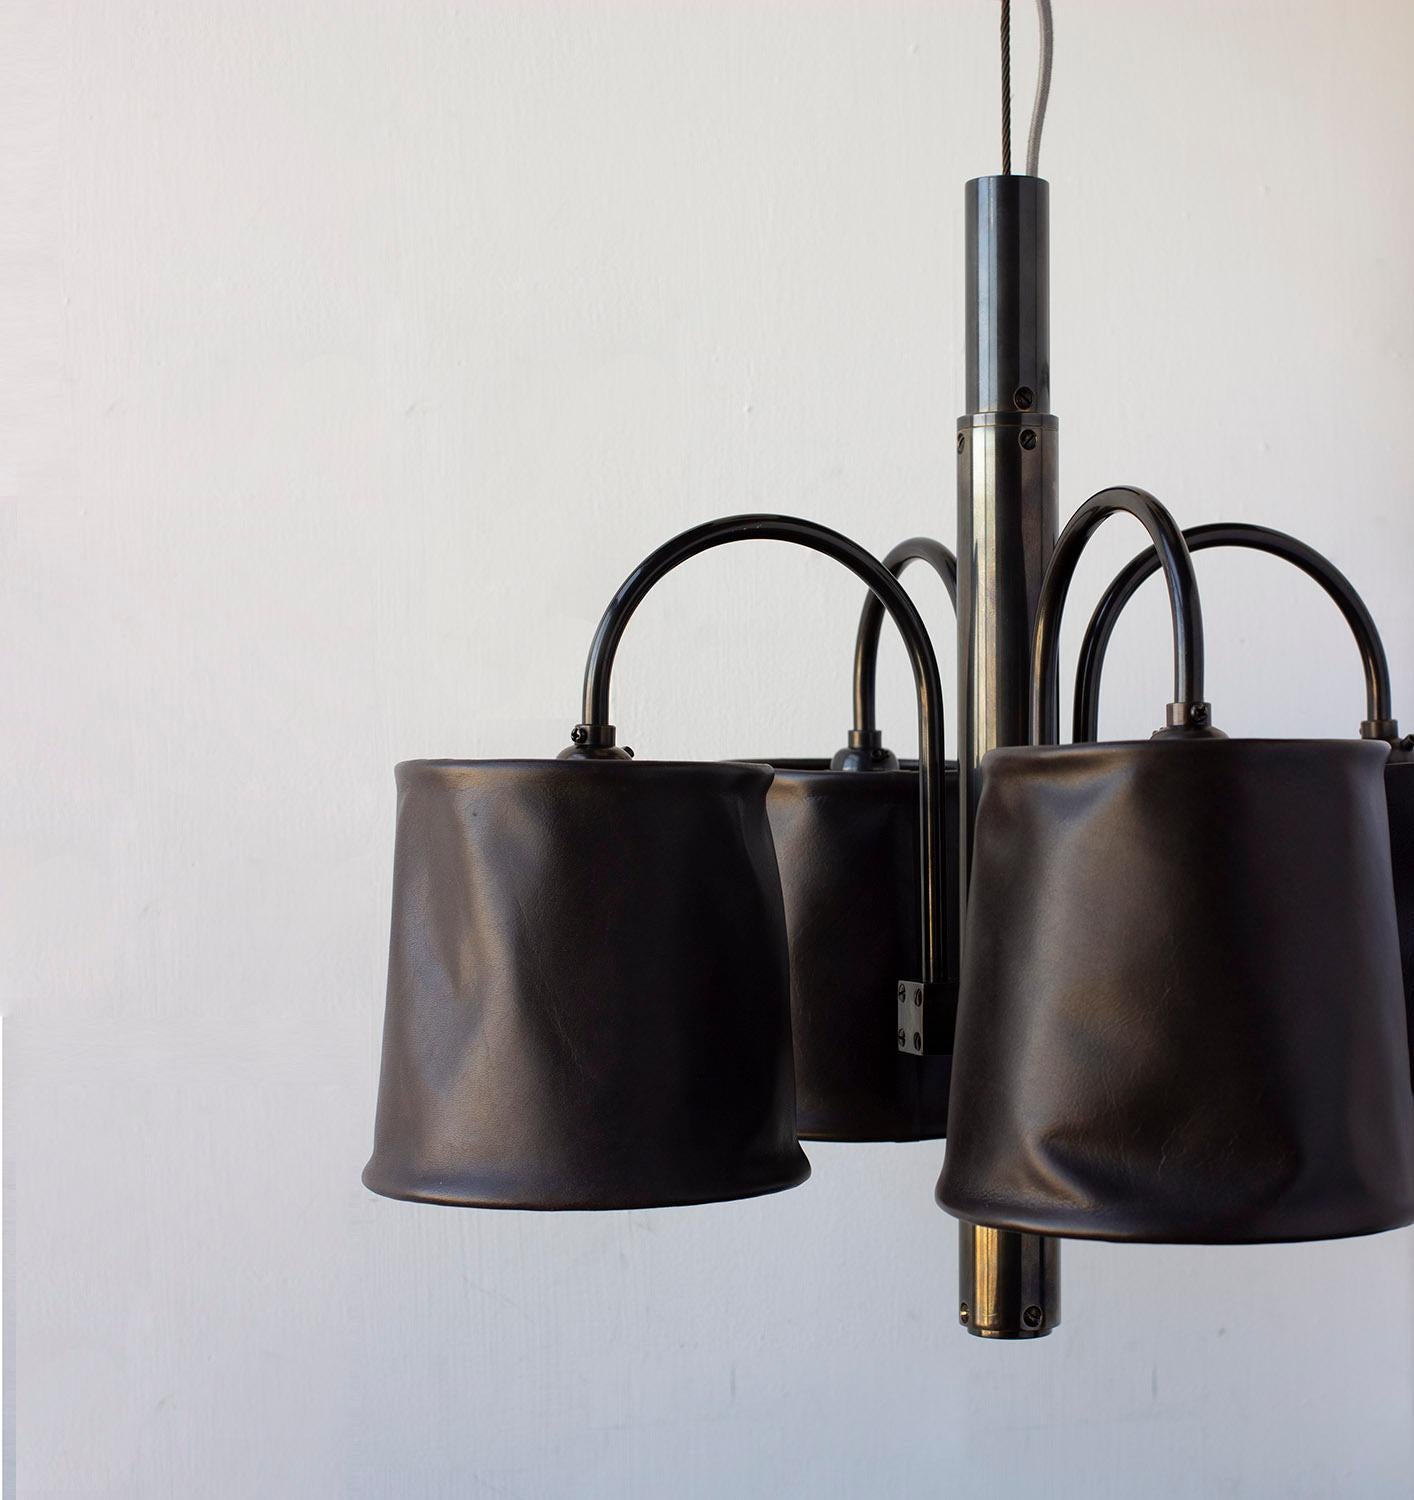 Solid machined brass, soft hand-dyed waxed leather shades, patinated copper tension wire with fabric cord. The opaque nature of leather creates an overall effect of directed ambient lighting well suited for over tables and dining areas. Hanging